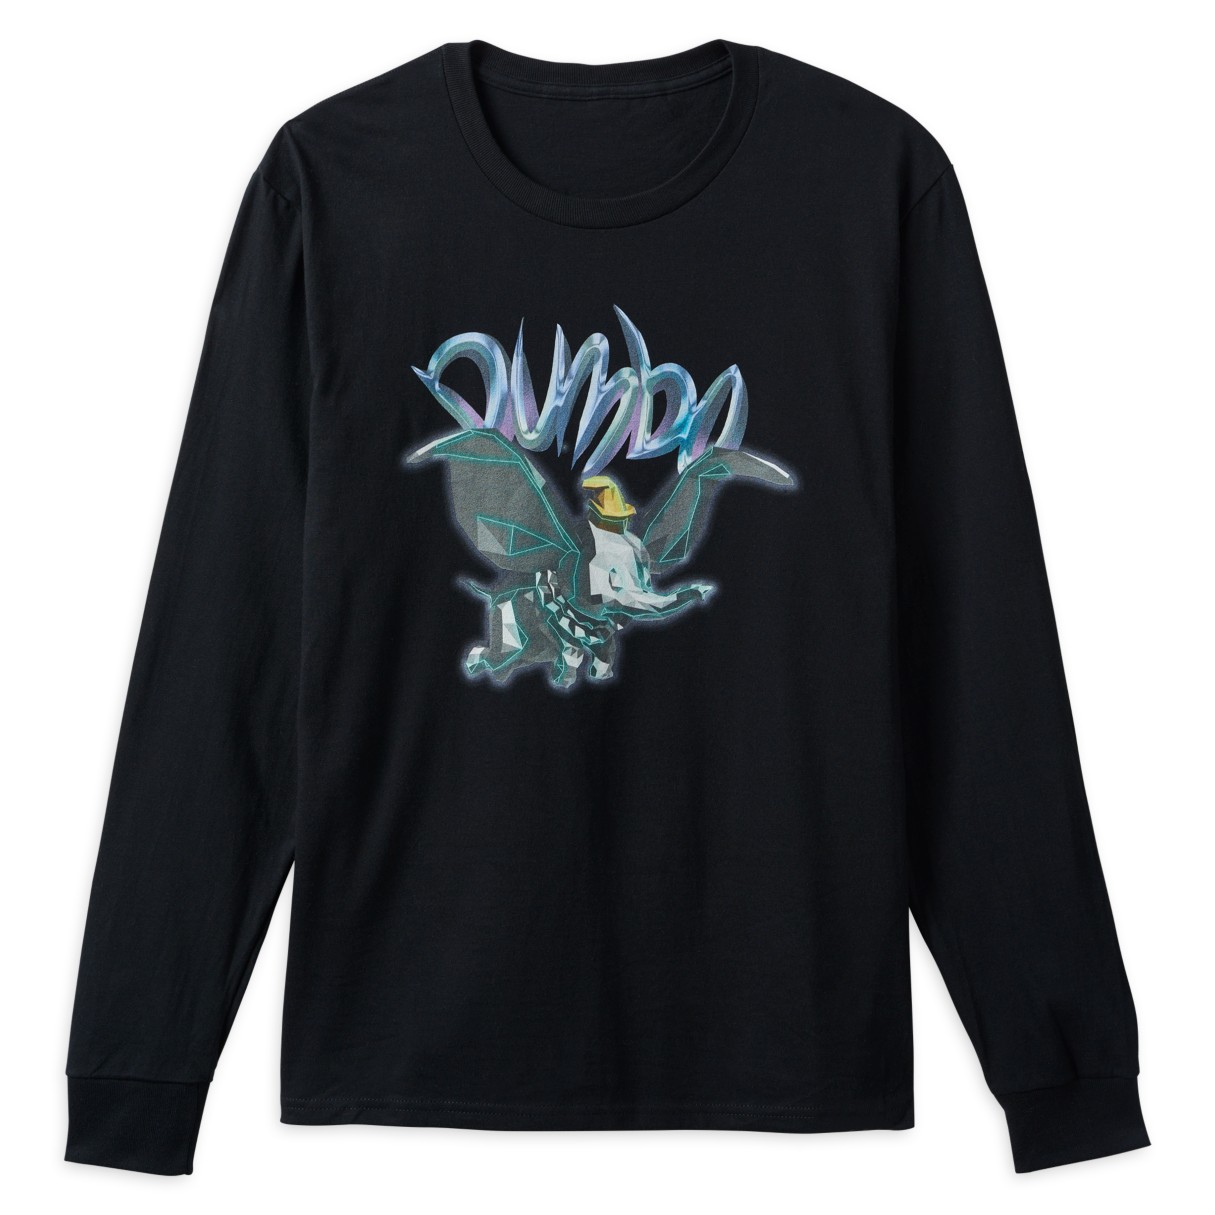 Dumbo Long Sleeve T-Shirt for Adults